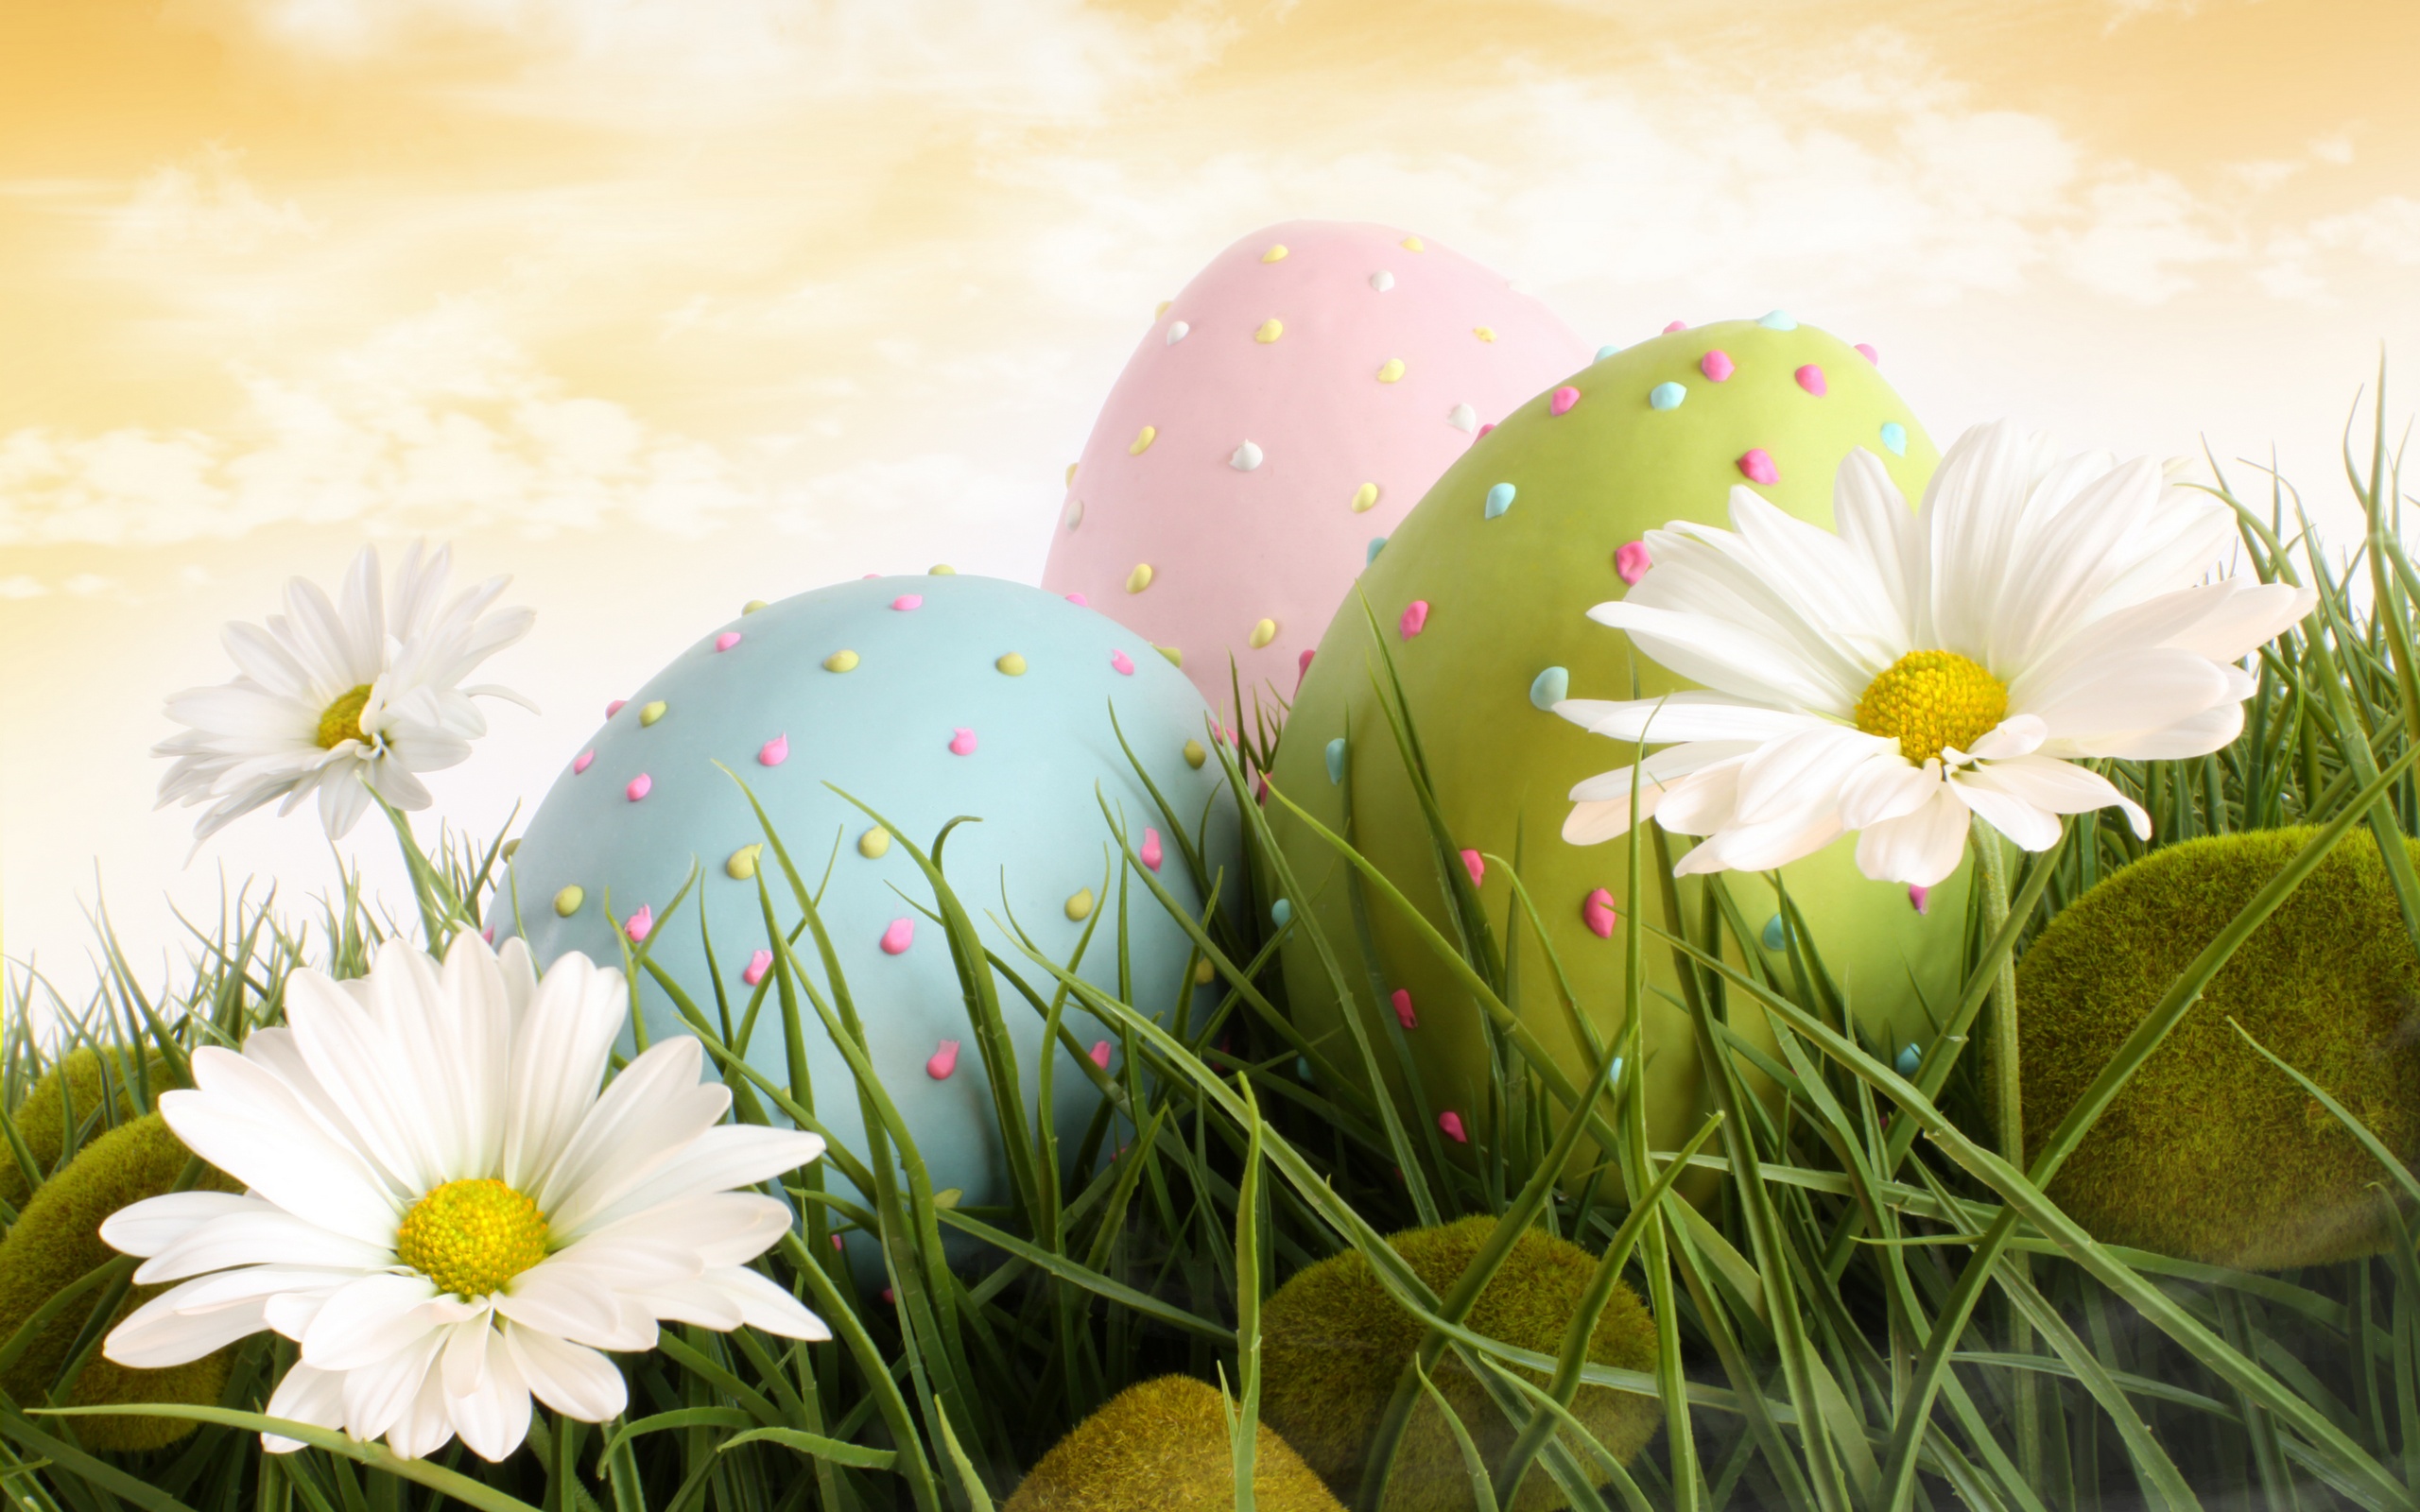 Closeup of decorated easter eggs in the grass with daisies